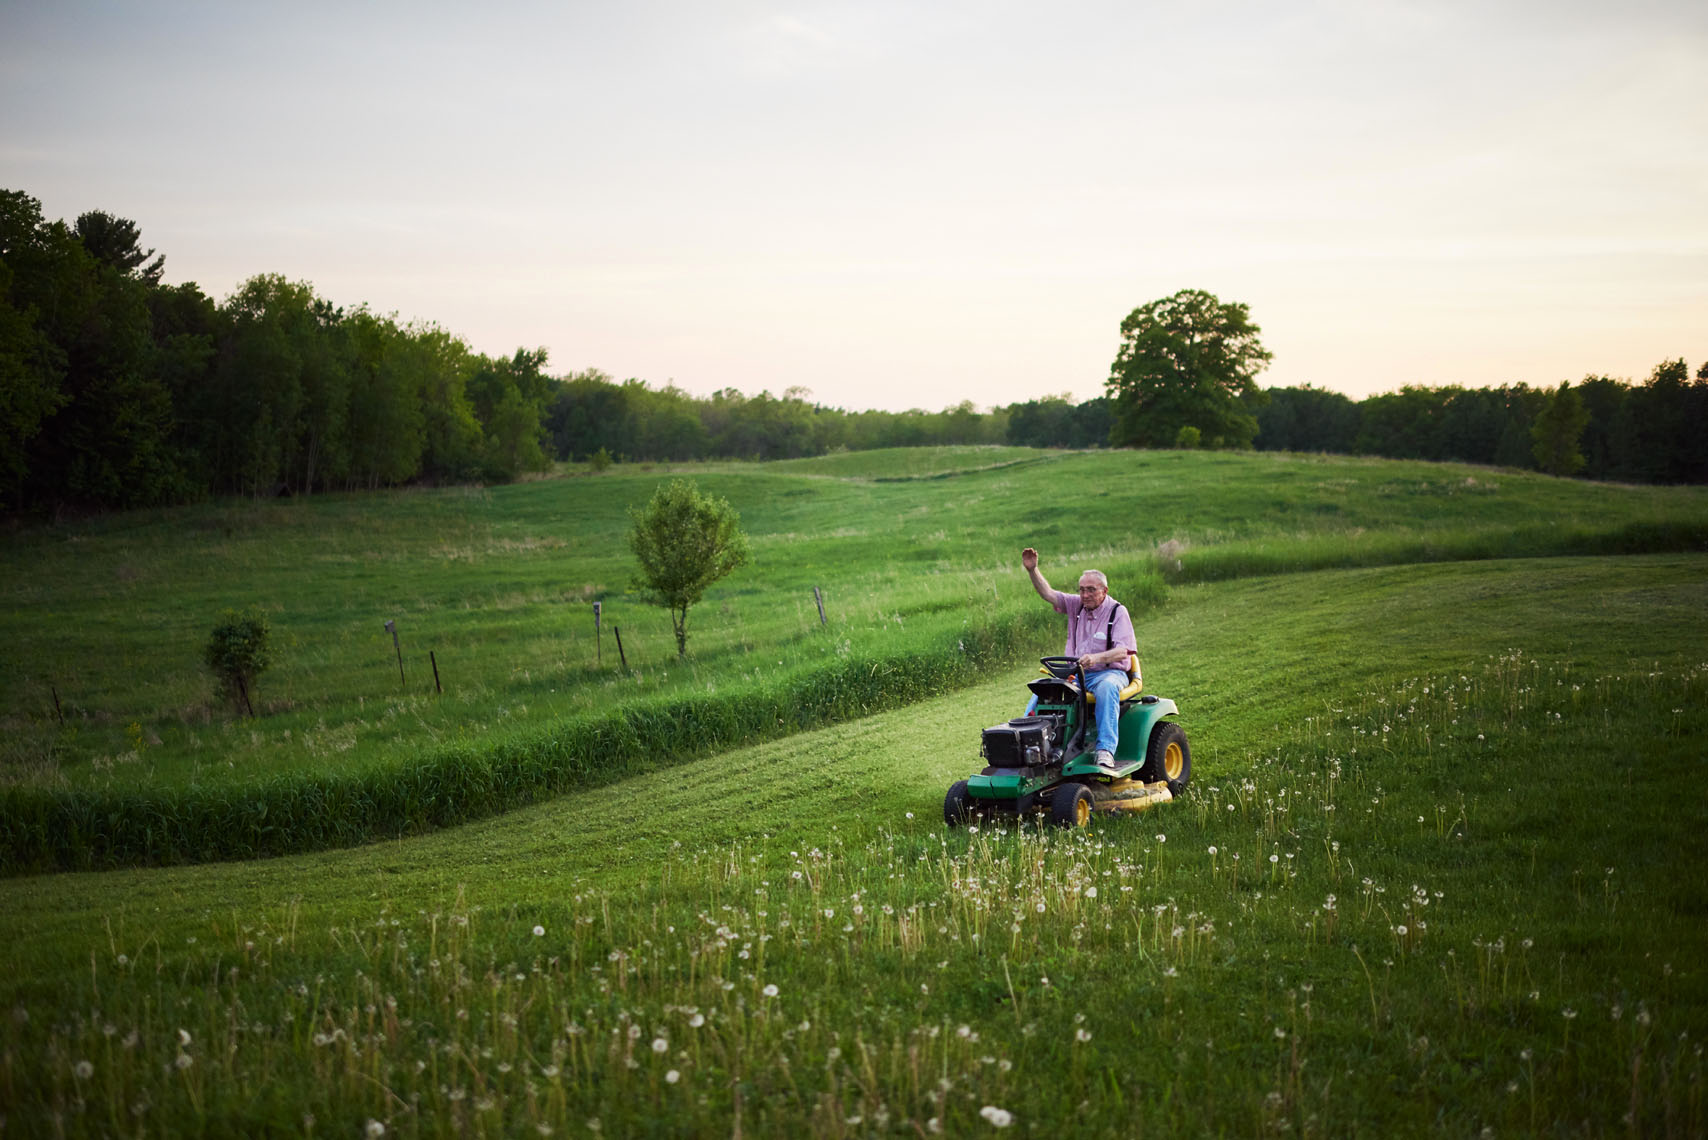 Old man waves hello from riding lawn mower